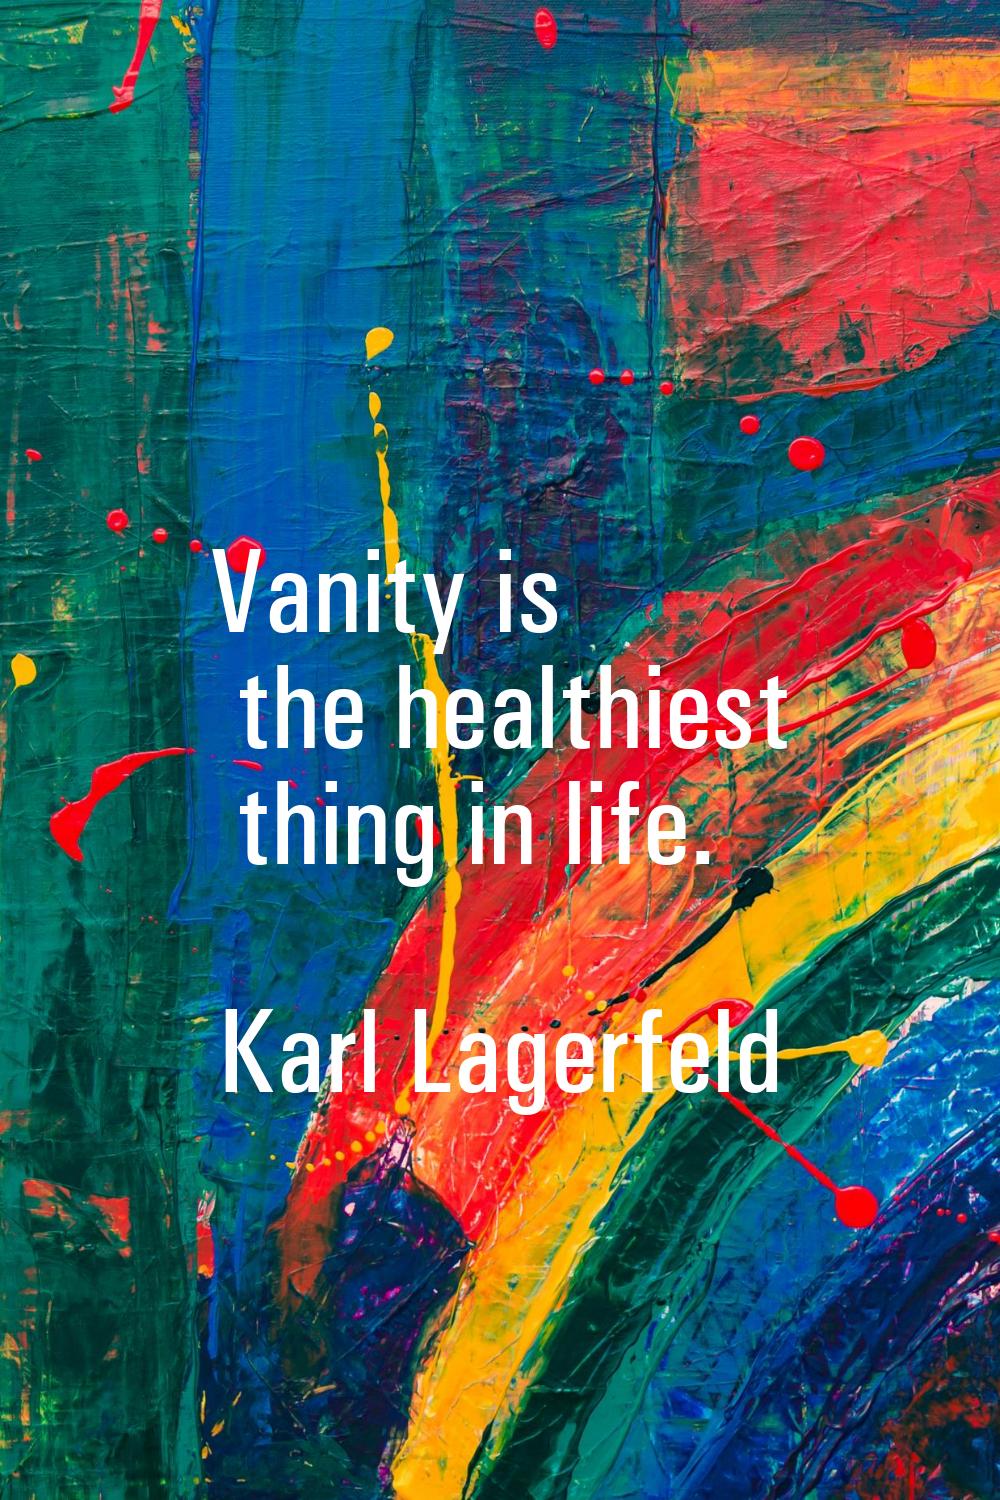 Vanity is the healthiest thing in life.